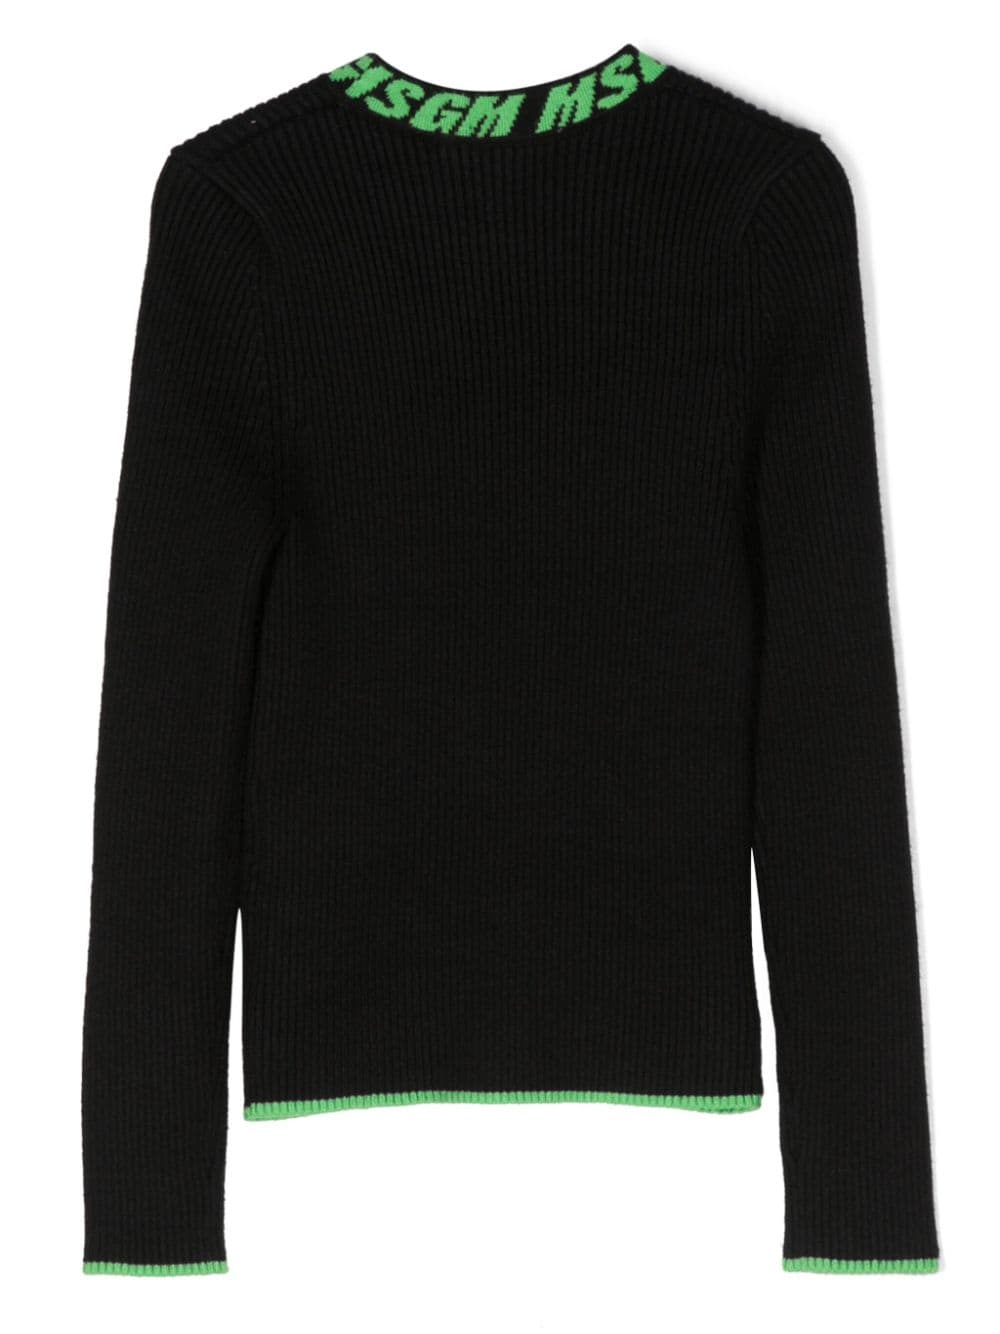 Black sweater for girls with logo